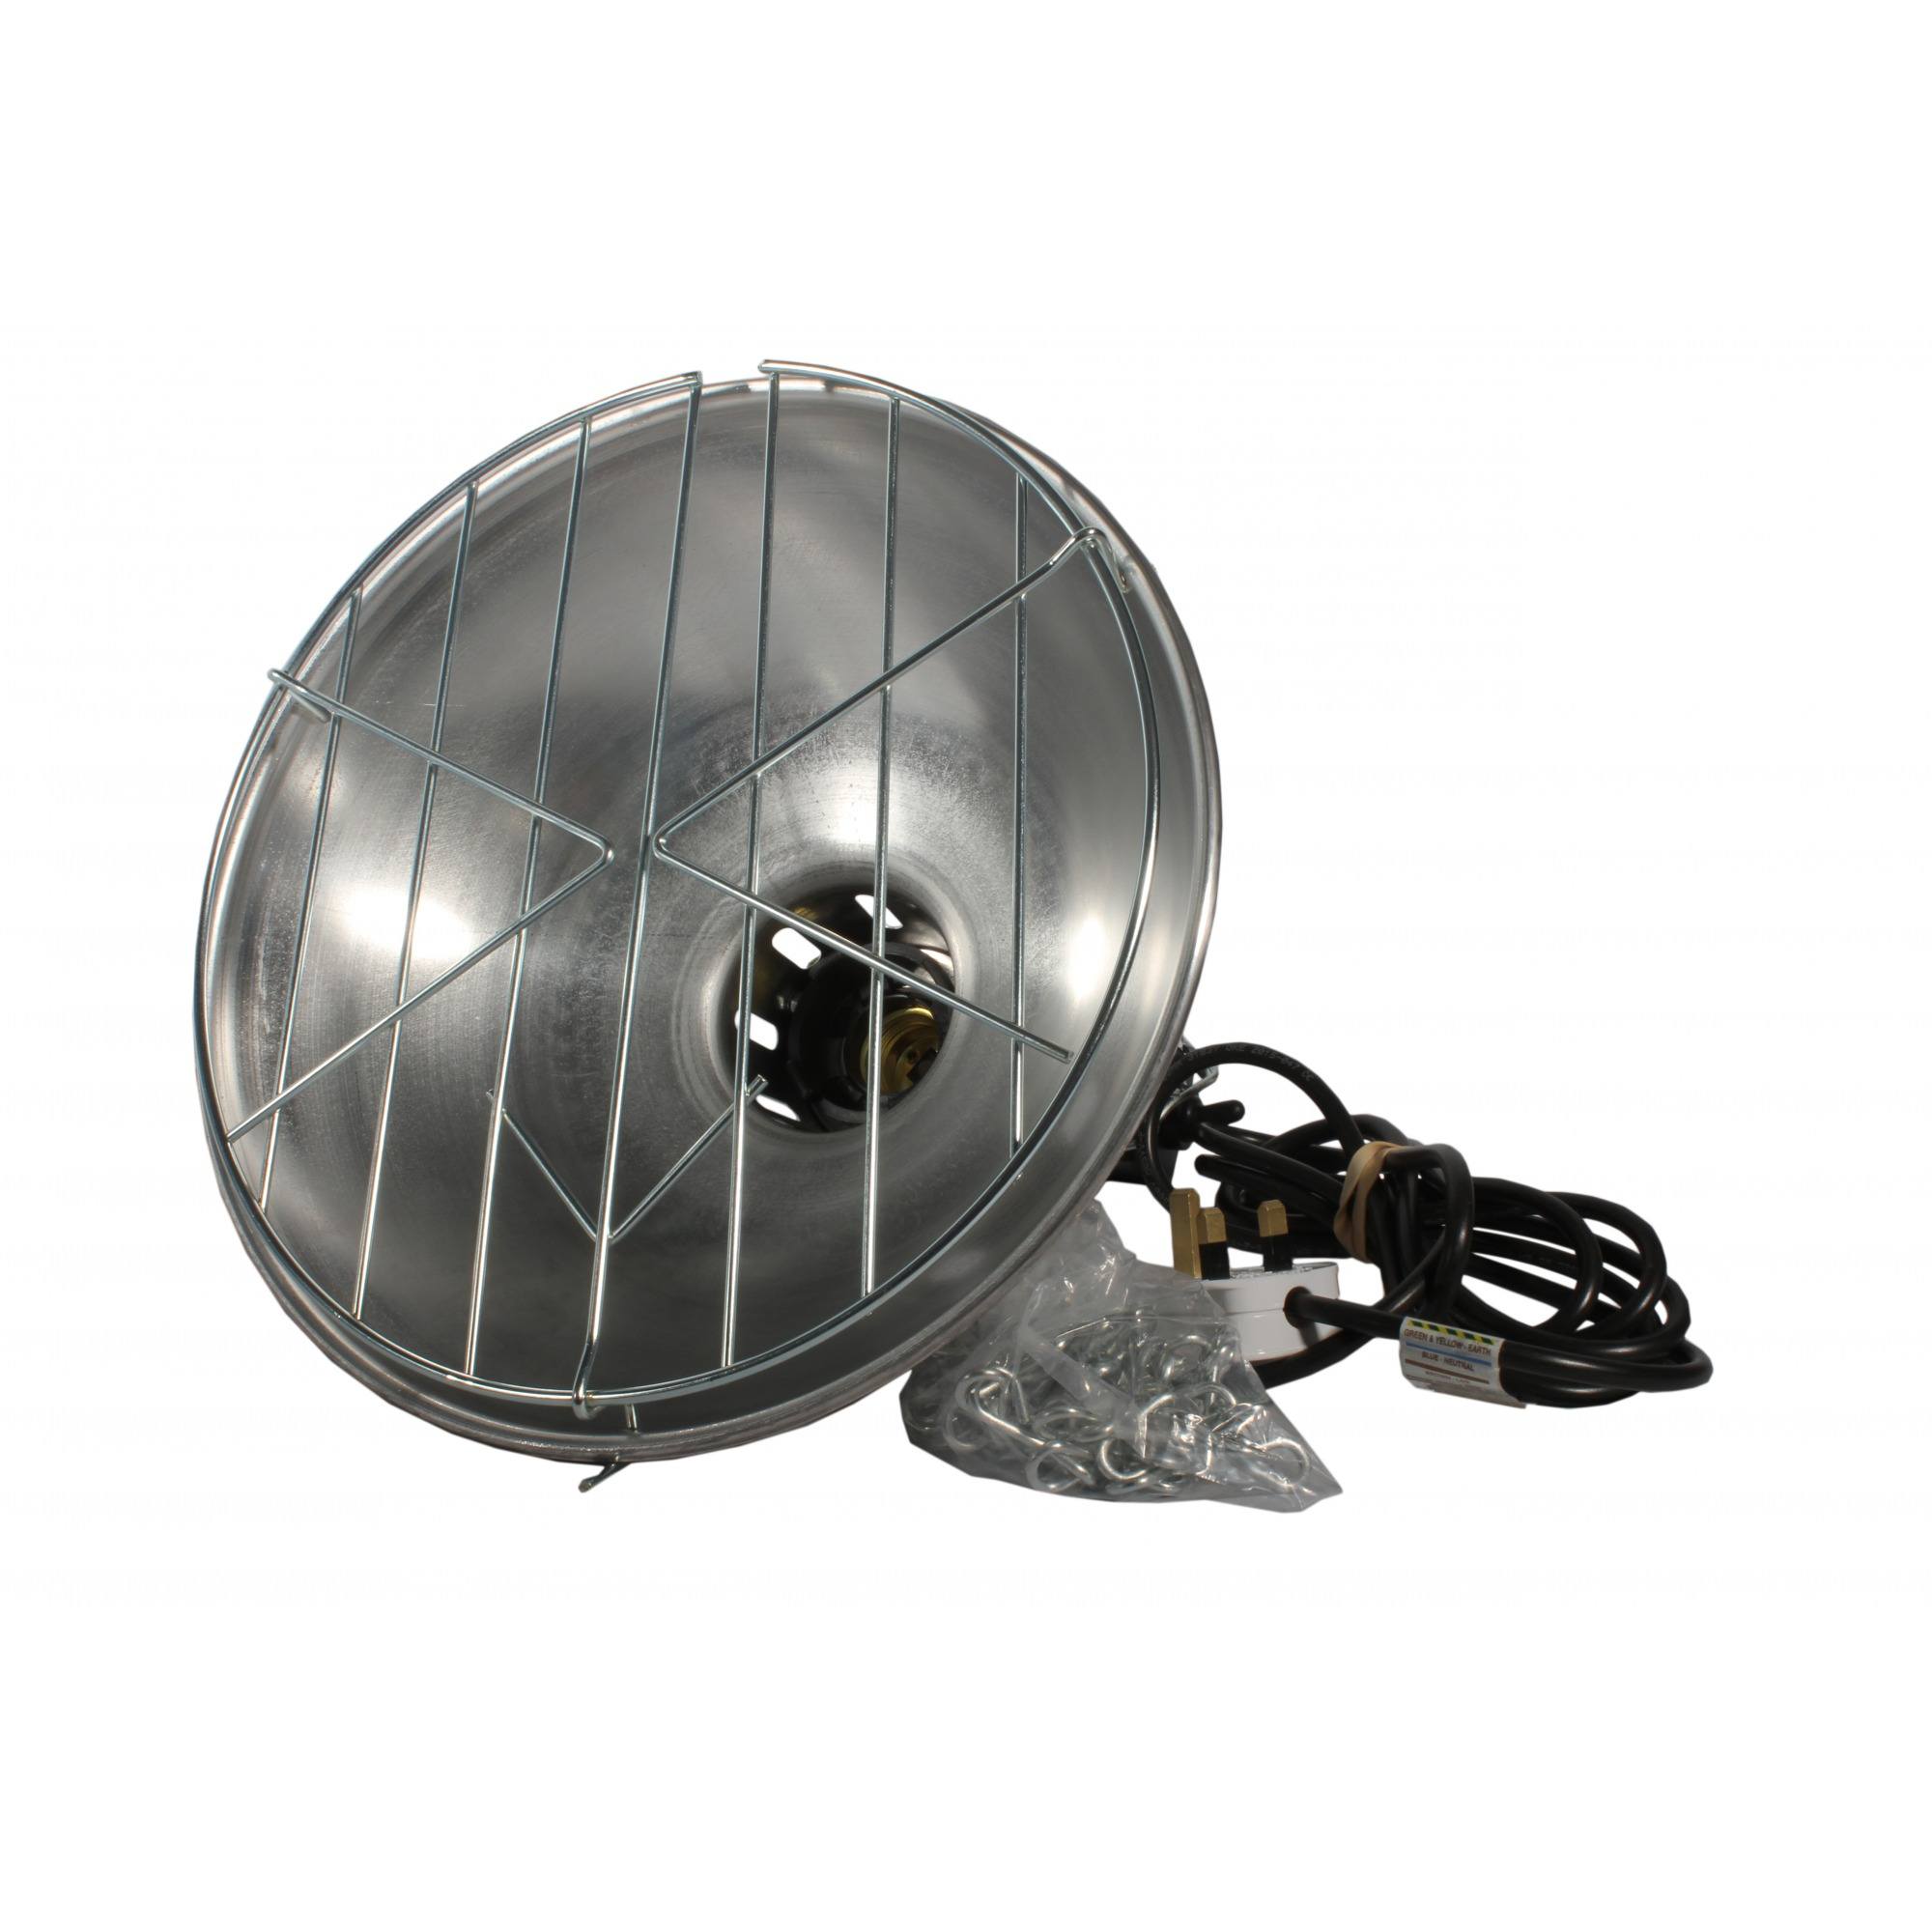 Agrihealth Heatlamp Infrared 300mm with Dimmer TA211